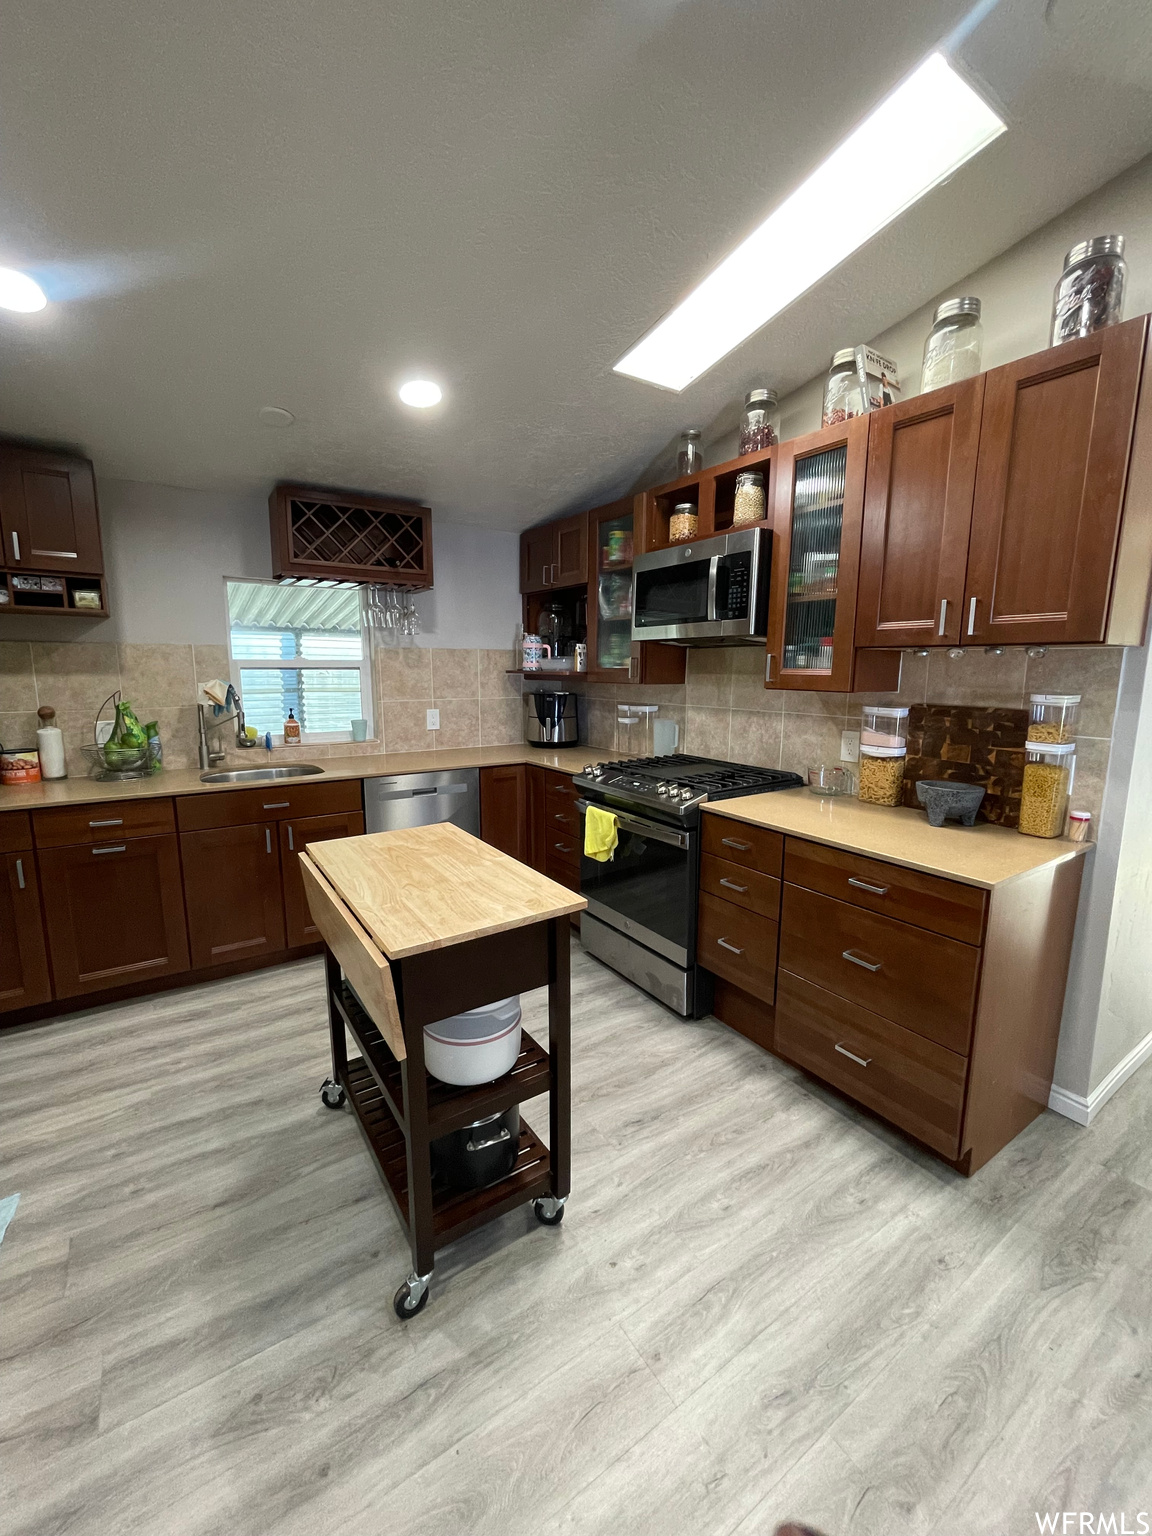 Kitchen with sink, appliances with stainless steel finishes, tasteful backsplash, and light hardwood / wood-style flooring